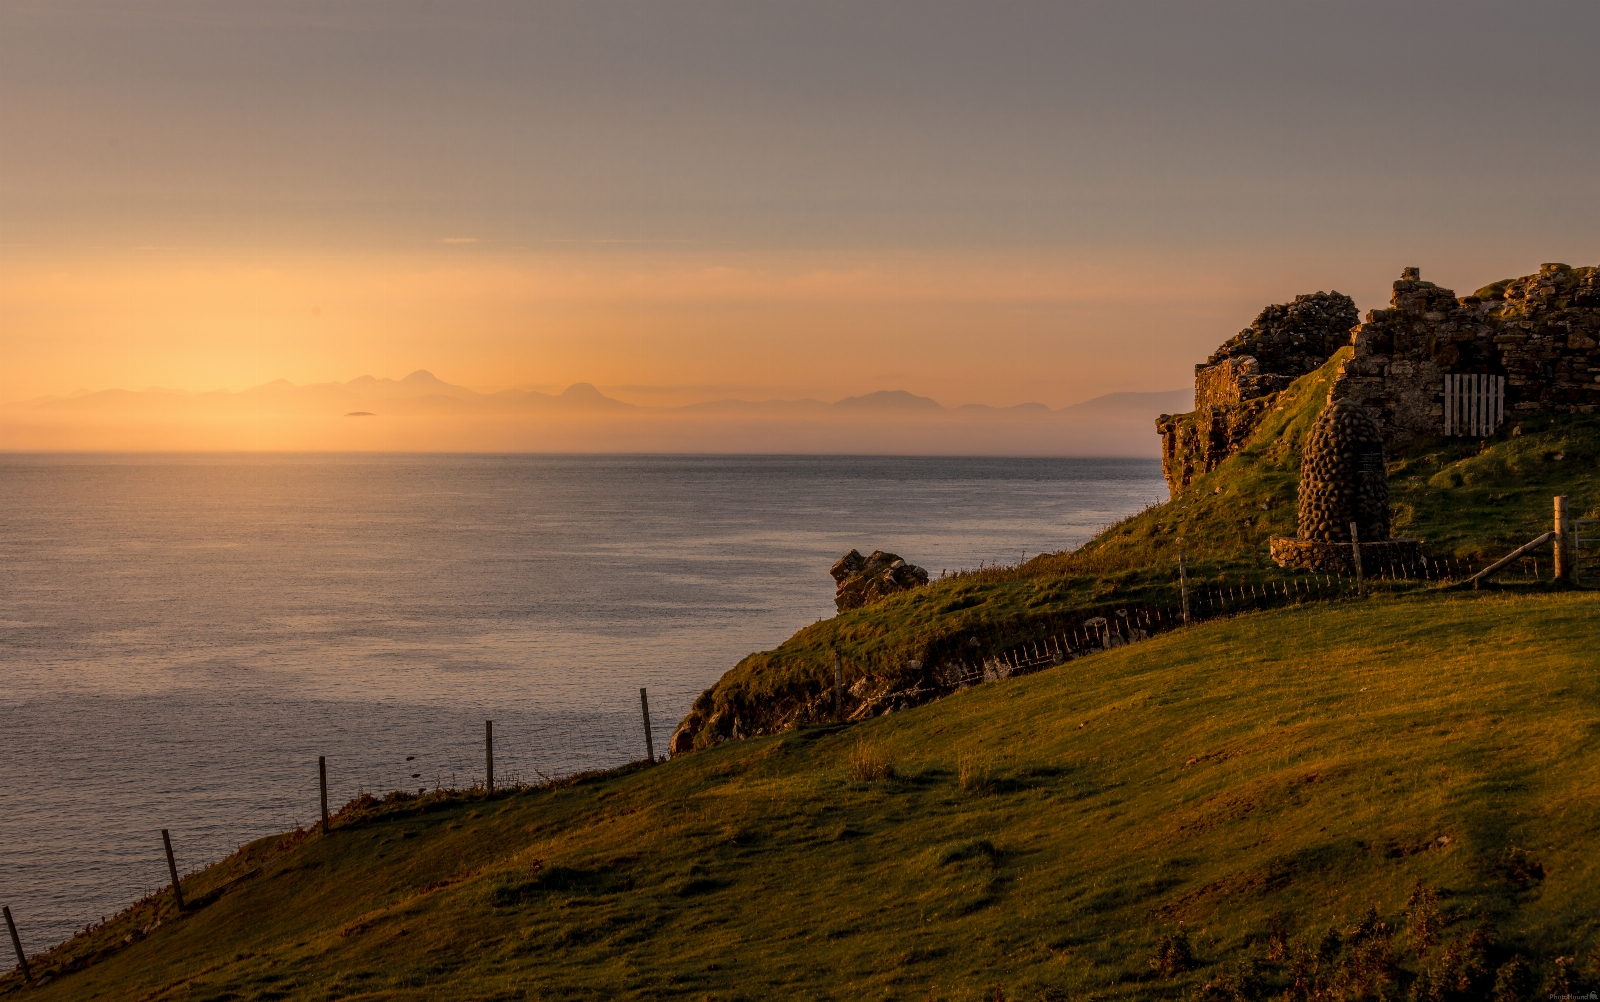 Image of Duntulm Castle at Sunset by Alison Fairley